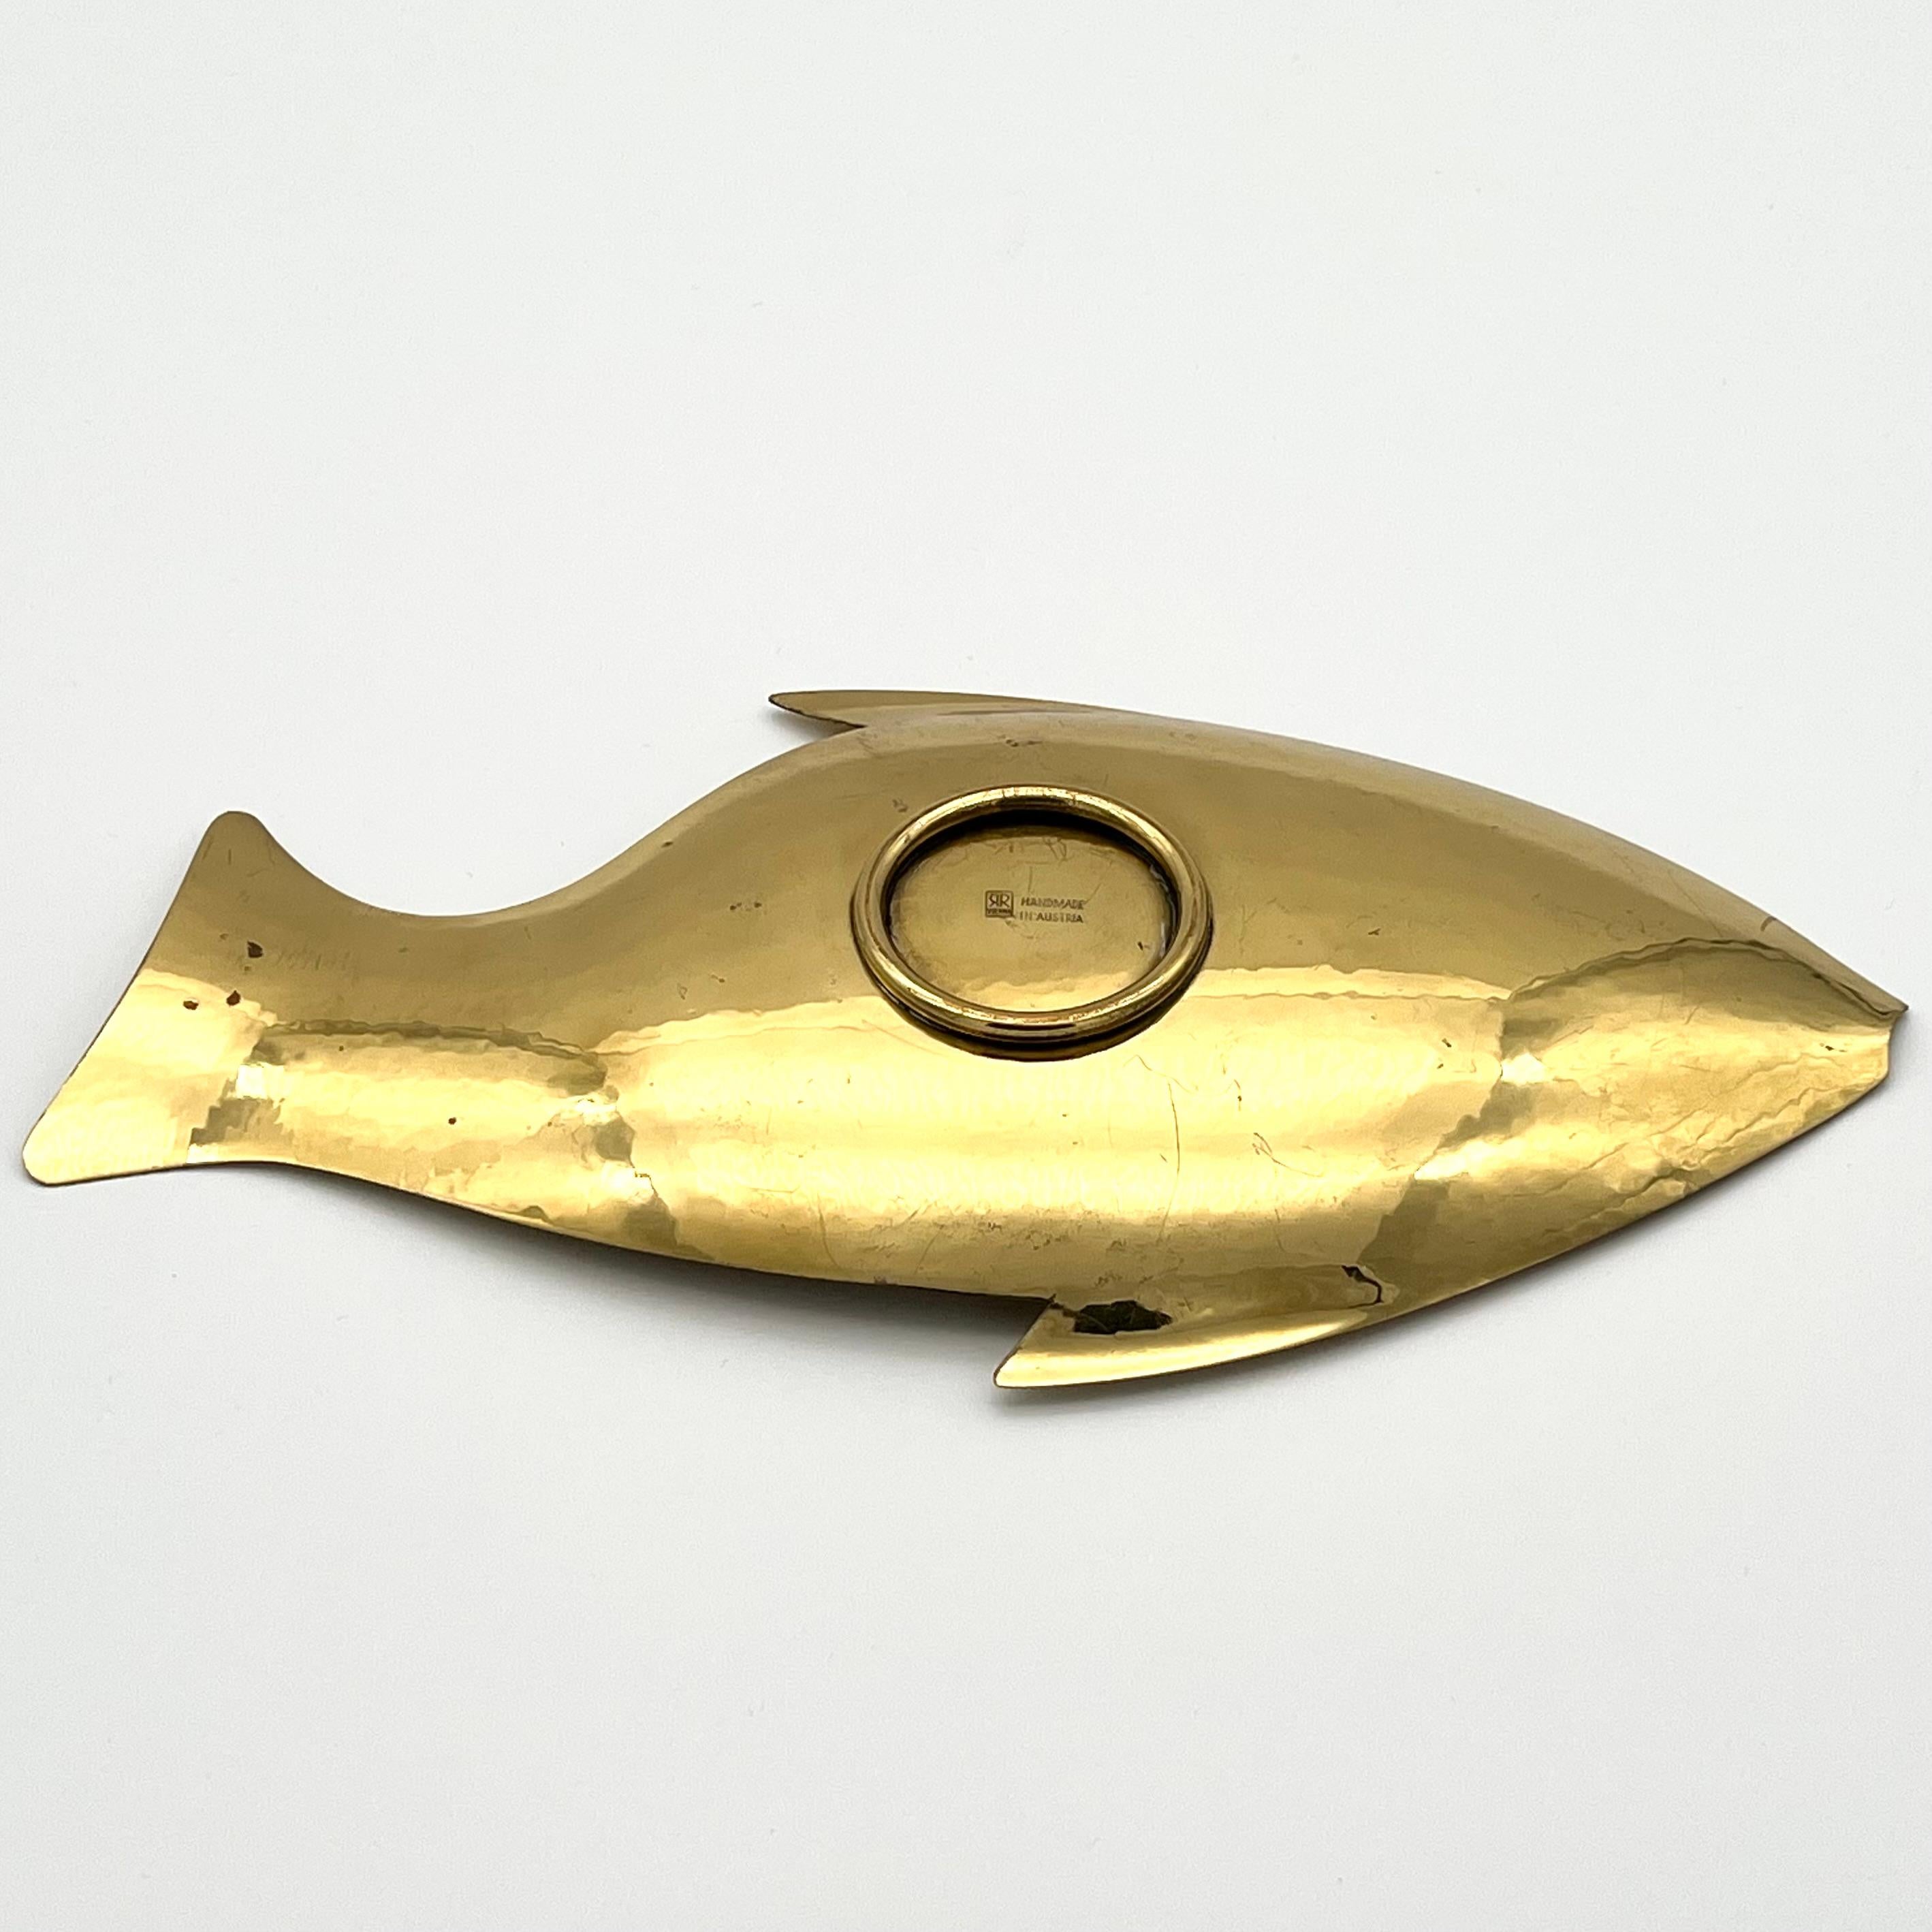 Mid-Century Modern Brass Fish Bowl by Richard Rohac, Signed, Handmade in Austria, 1950s For Sale